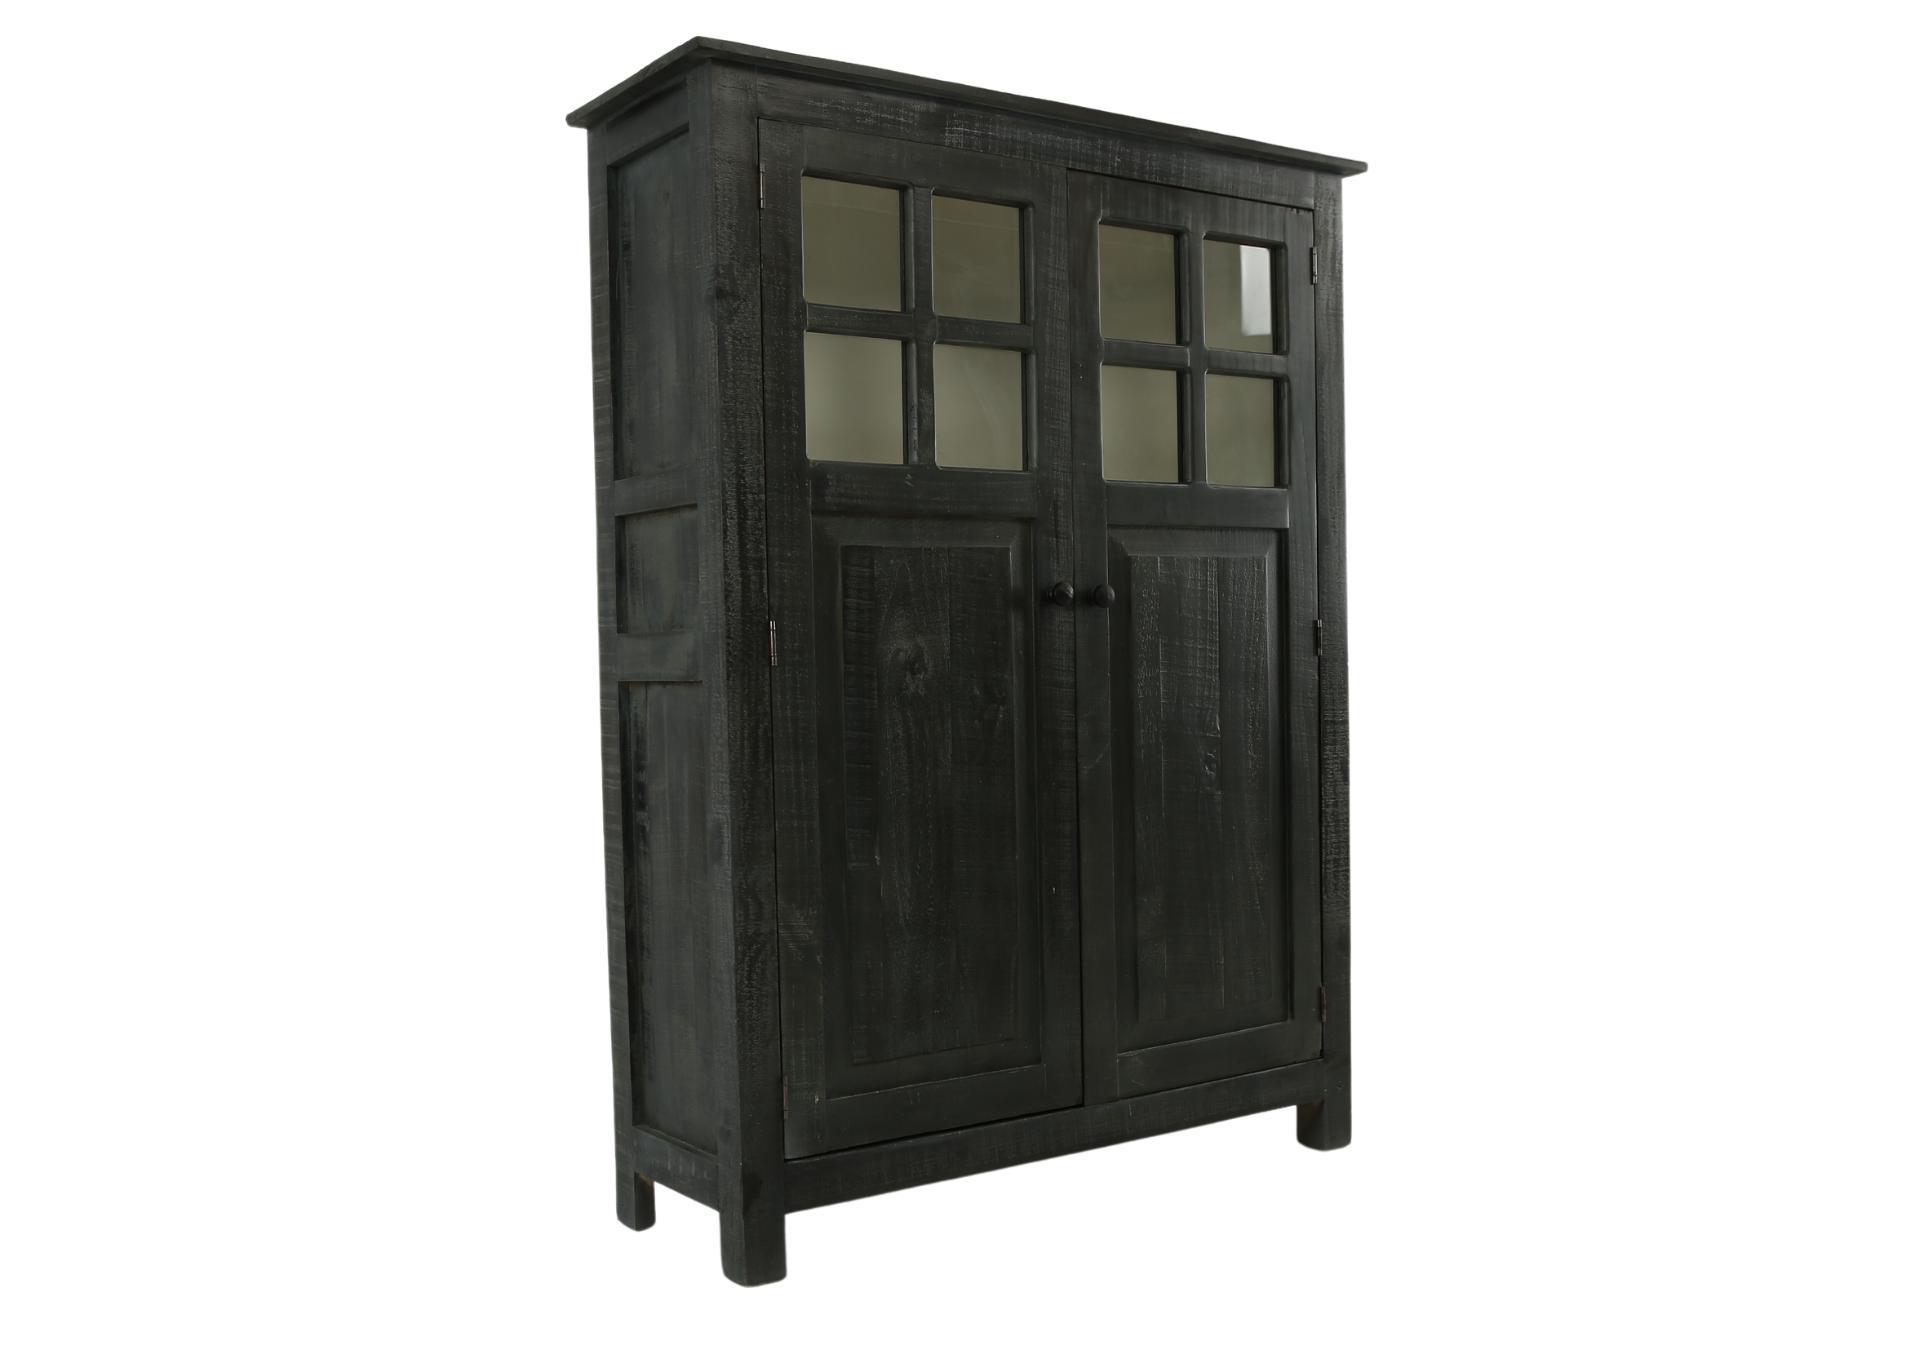 WILLIAMSBURG ARMOIRE,ARDENT HOME